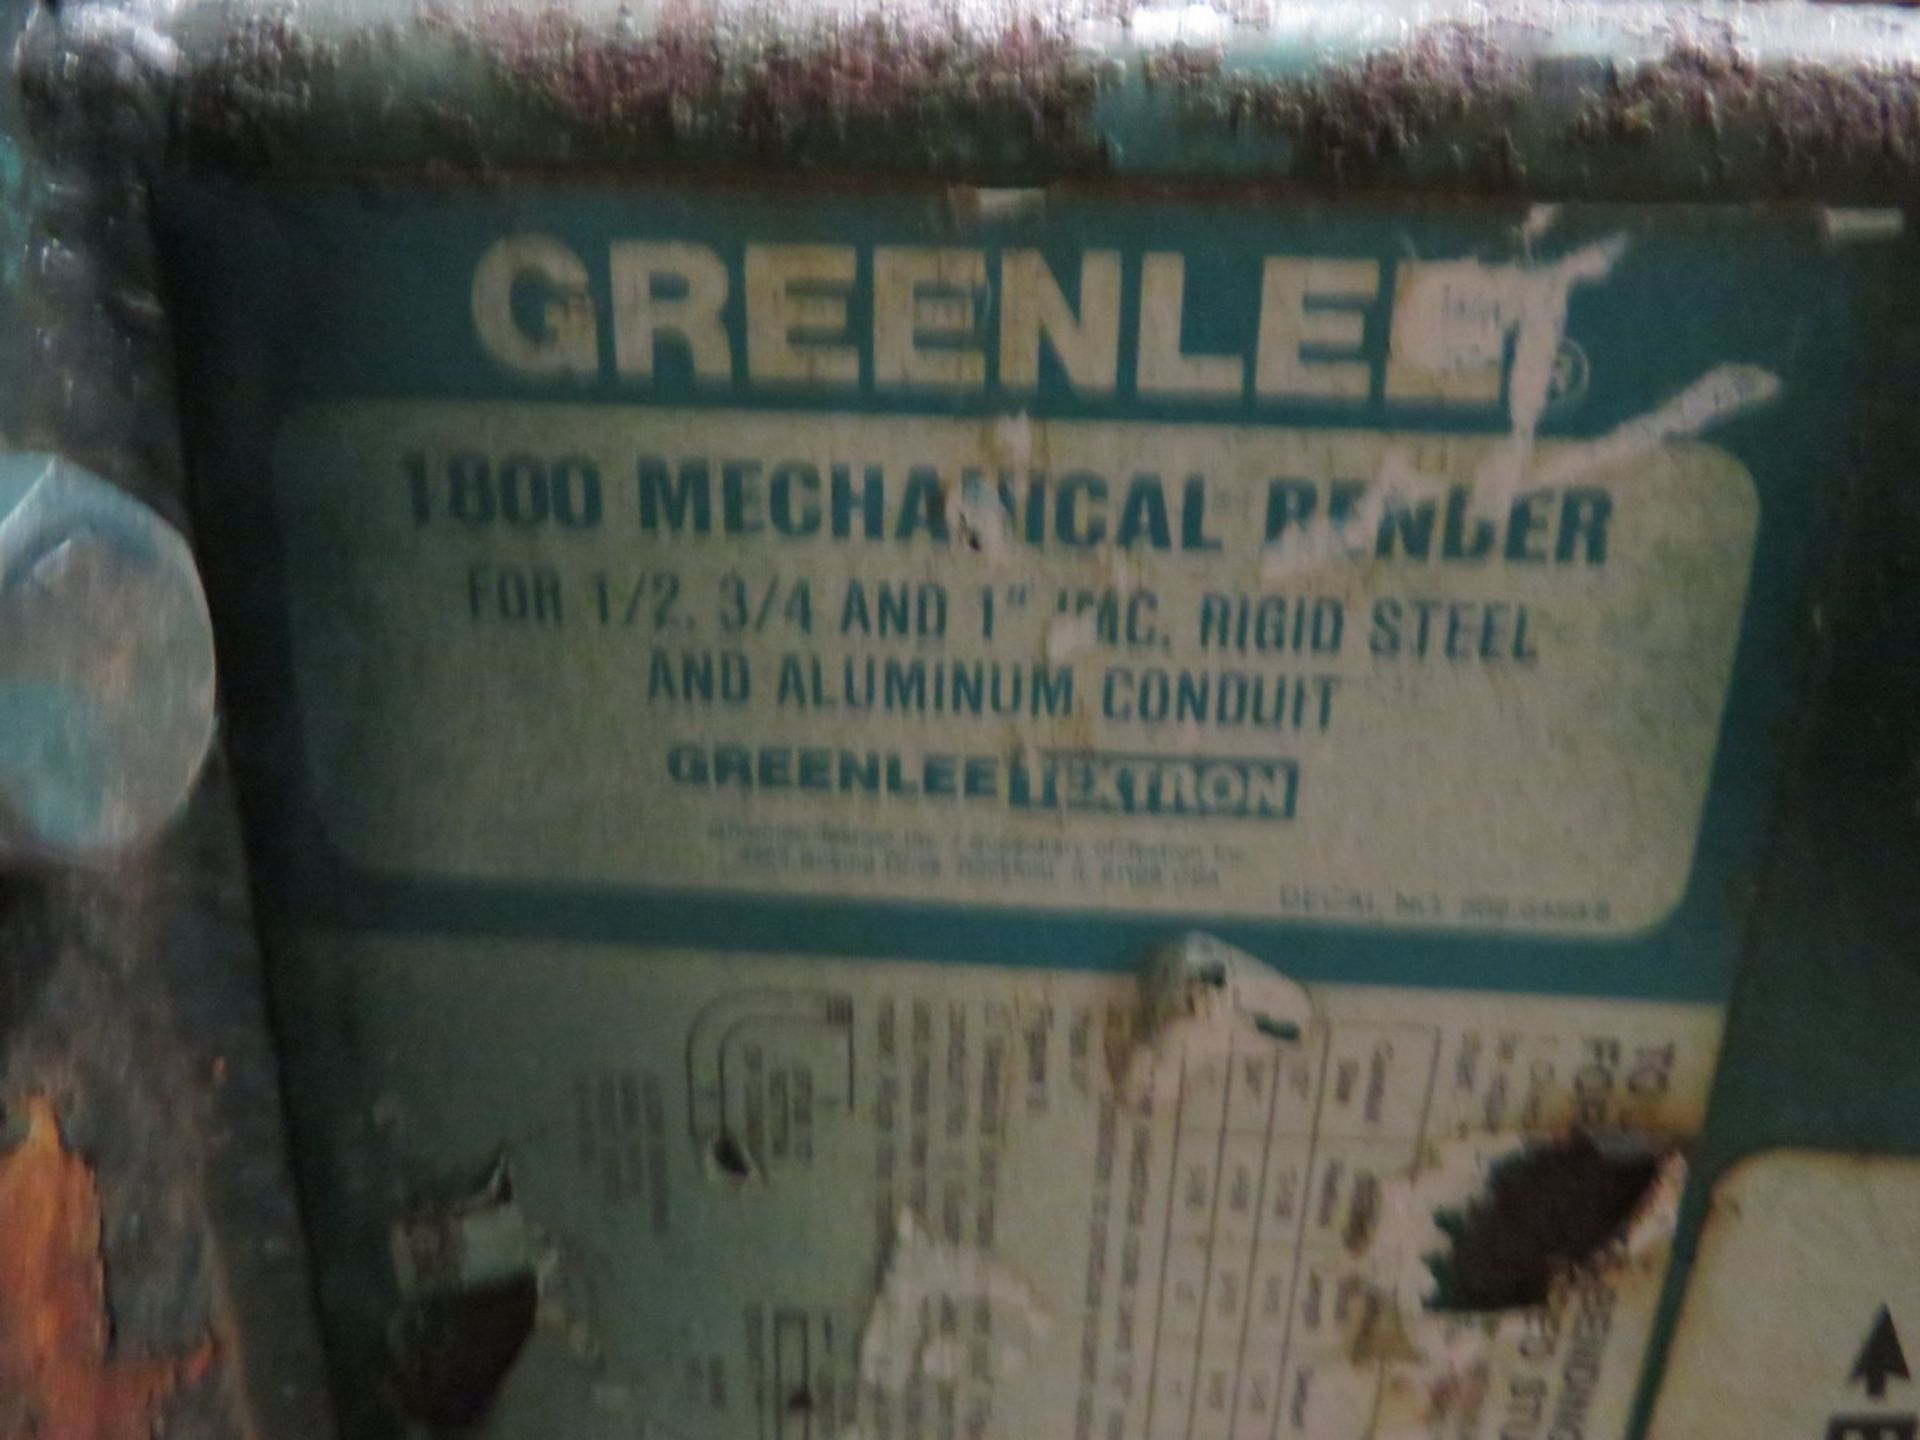 Greenlee 1800 Manual Pipe Bender 1/2", 3/4", 1" [Loc: Church Hill] - Image 2 of 2